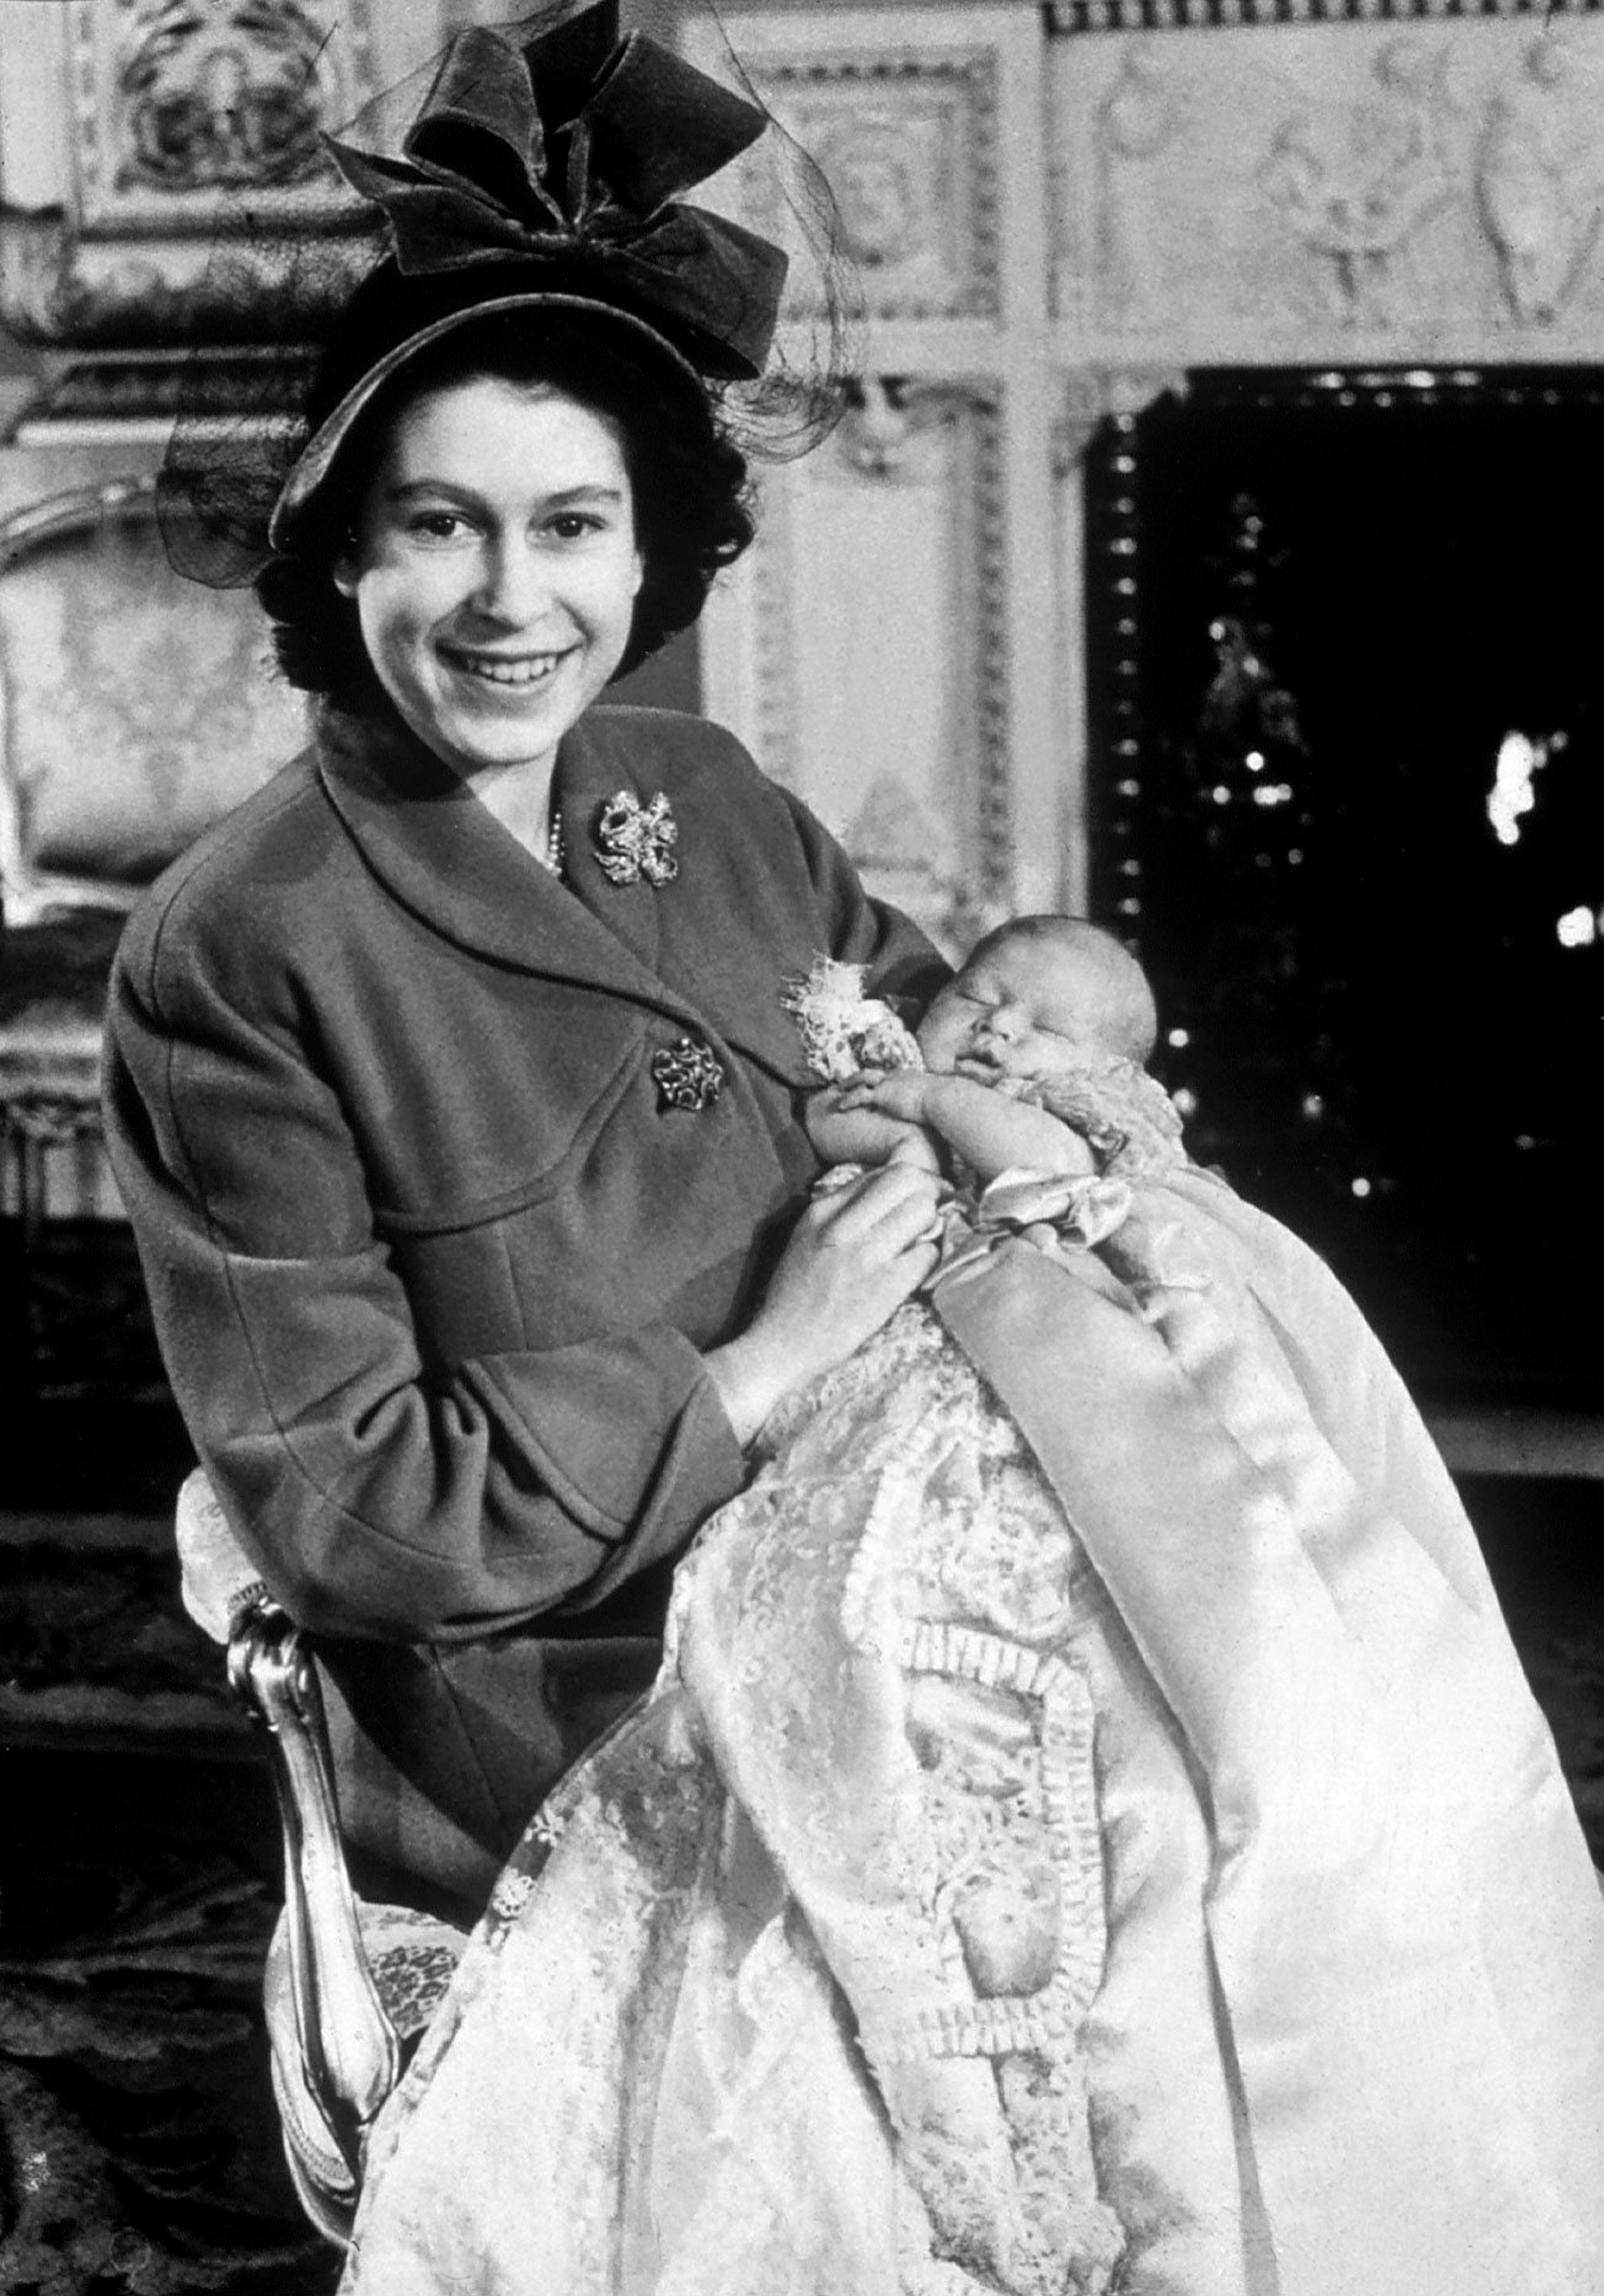 <p>Princess Elizabeth (later Queen Elizabeth II) held her first child, Prince Charles, at his christening in 1948.</p>